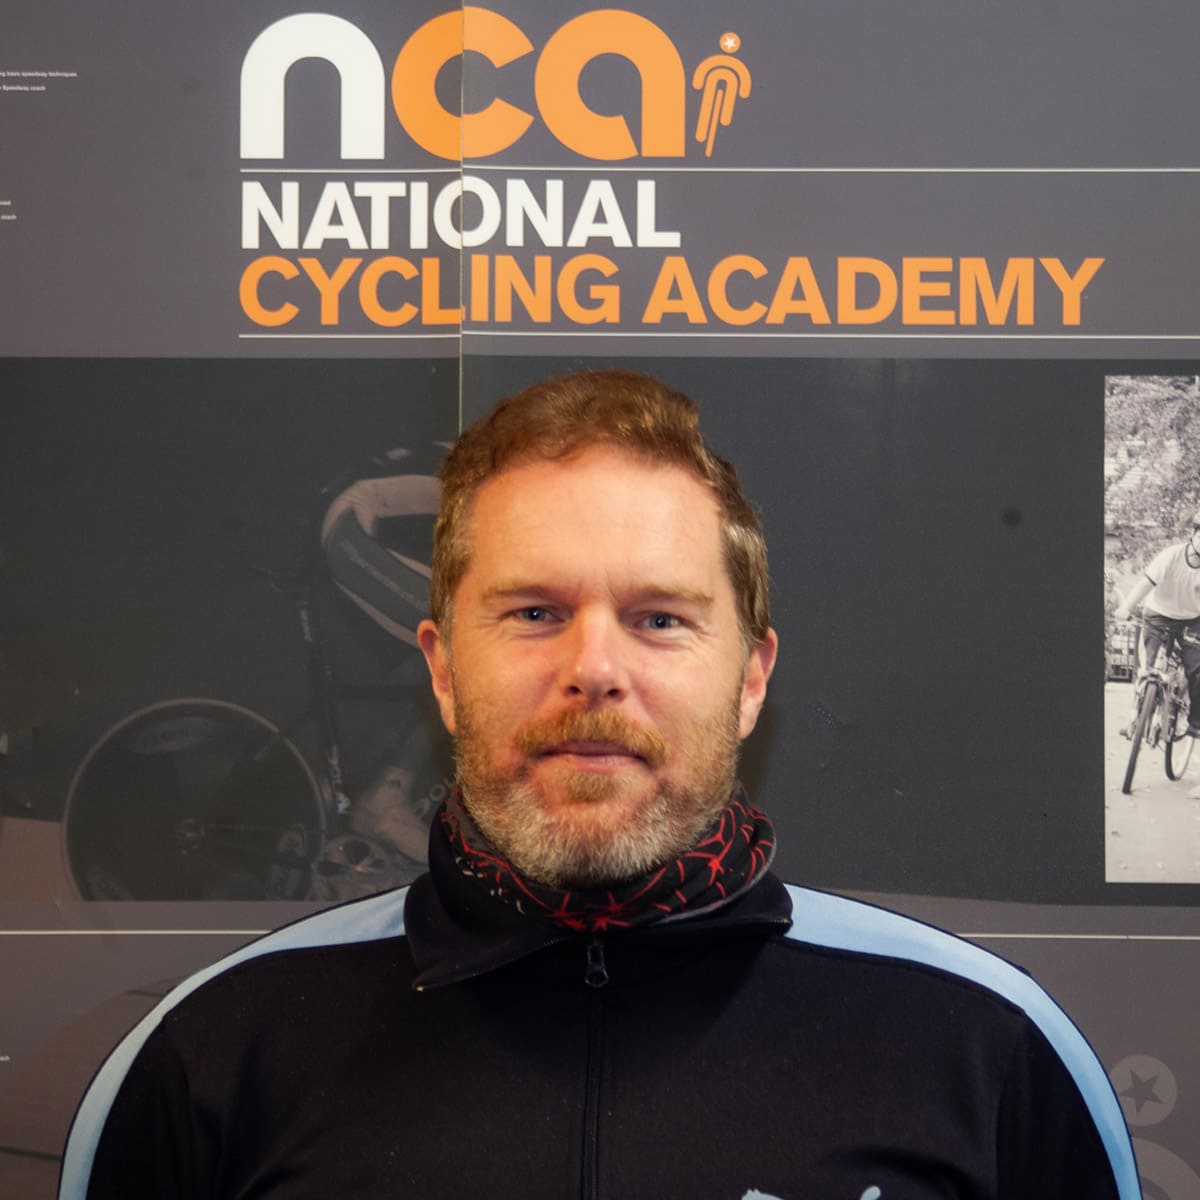 About NCA - Paul Turner